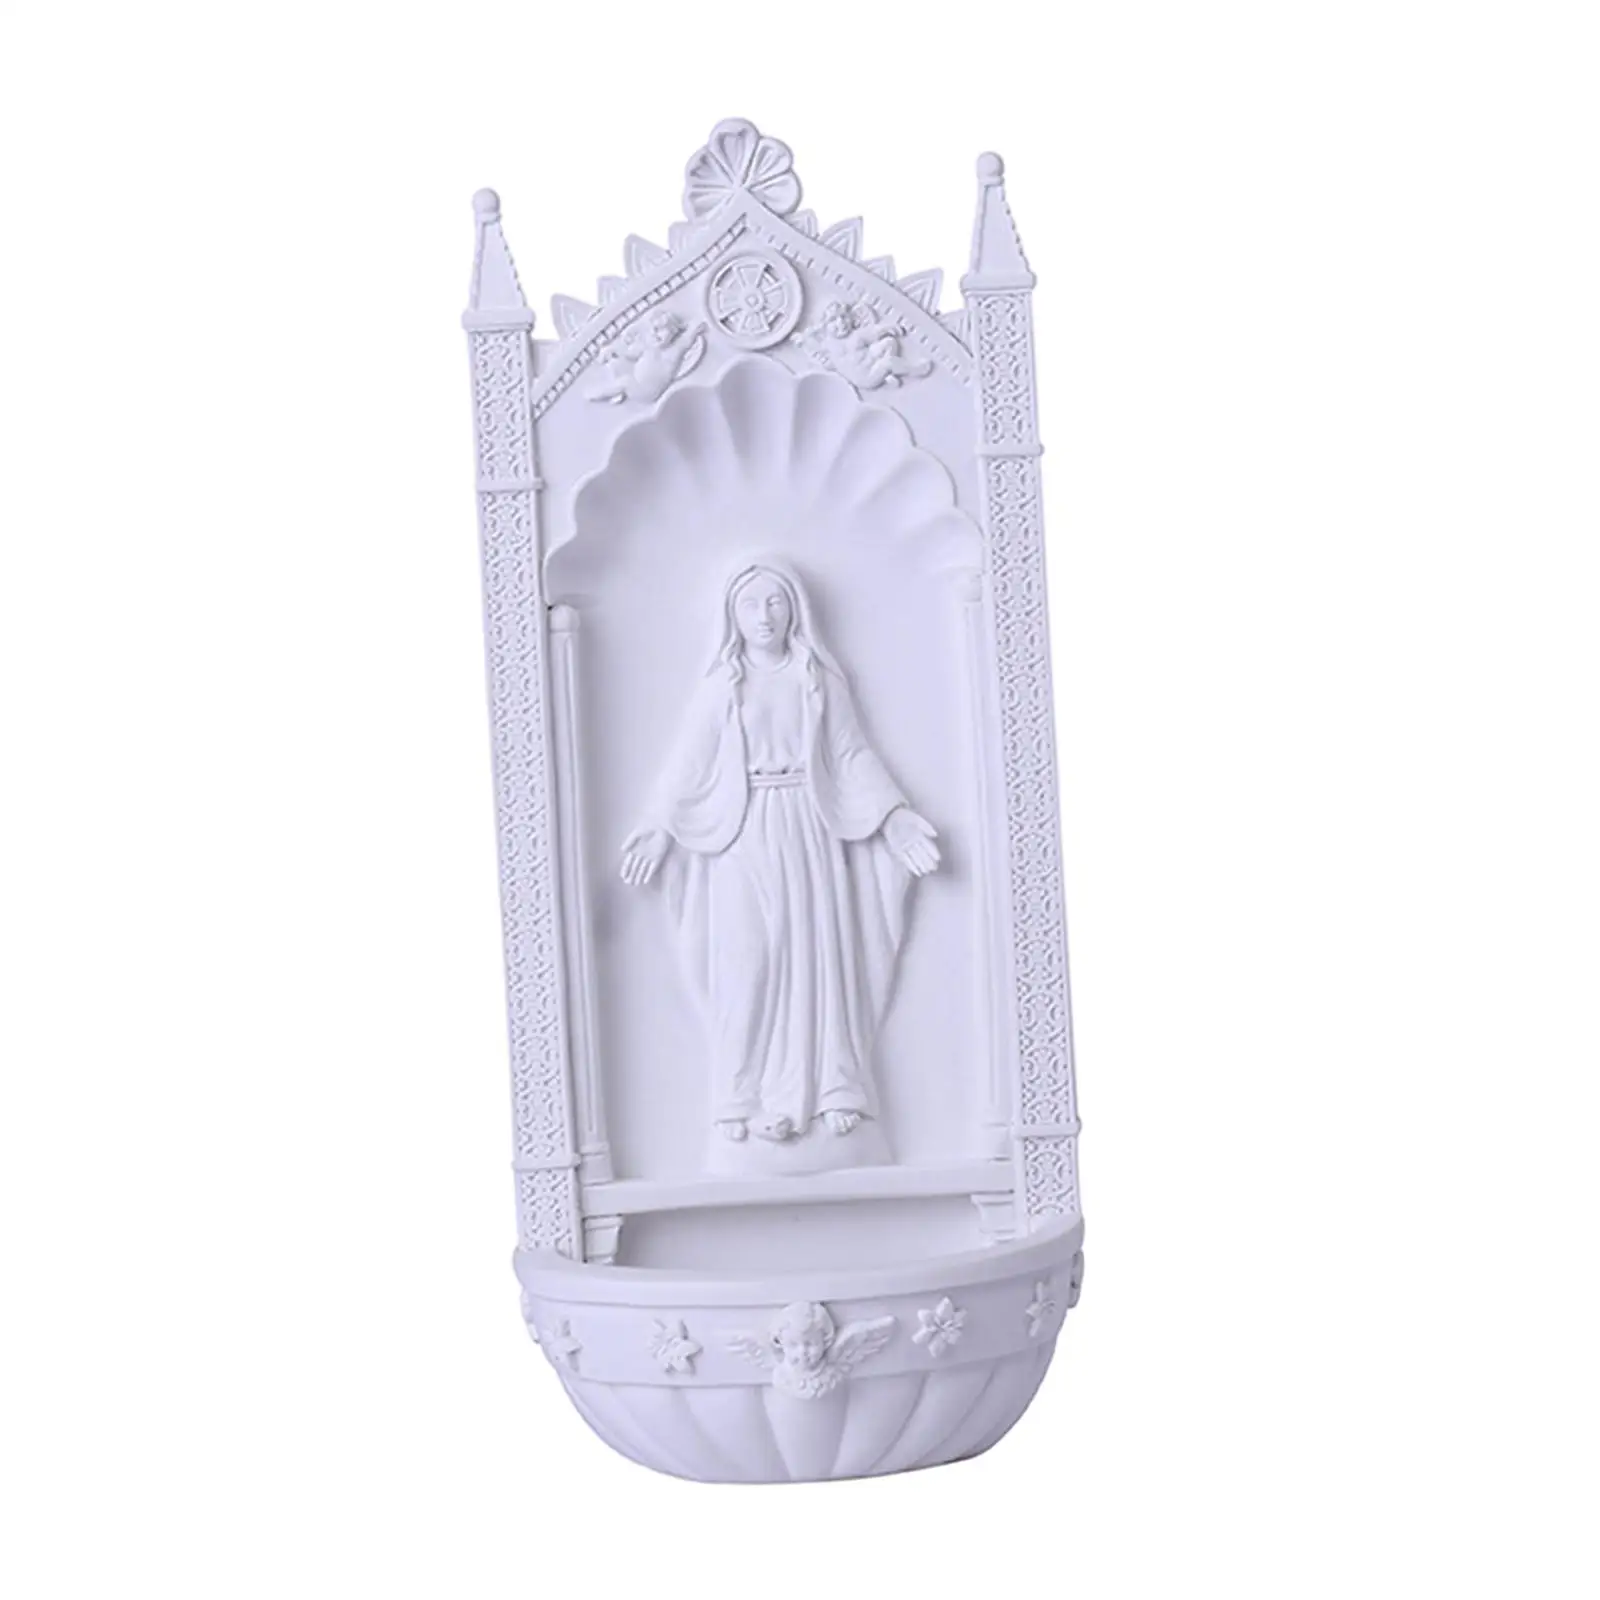 Resin Jesus Statue Wall Hanging Desk Display Christian Blessed Virgin Mary Jesus Figurine Collection for Living Room Decoration